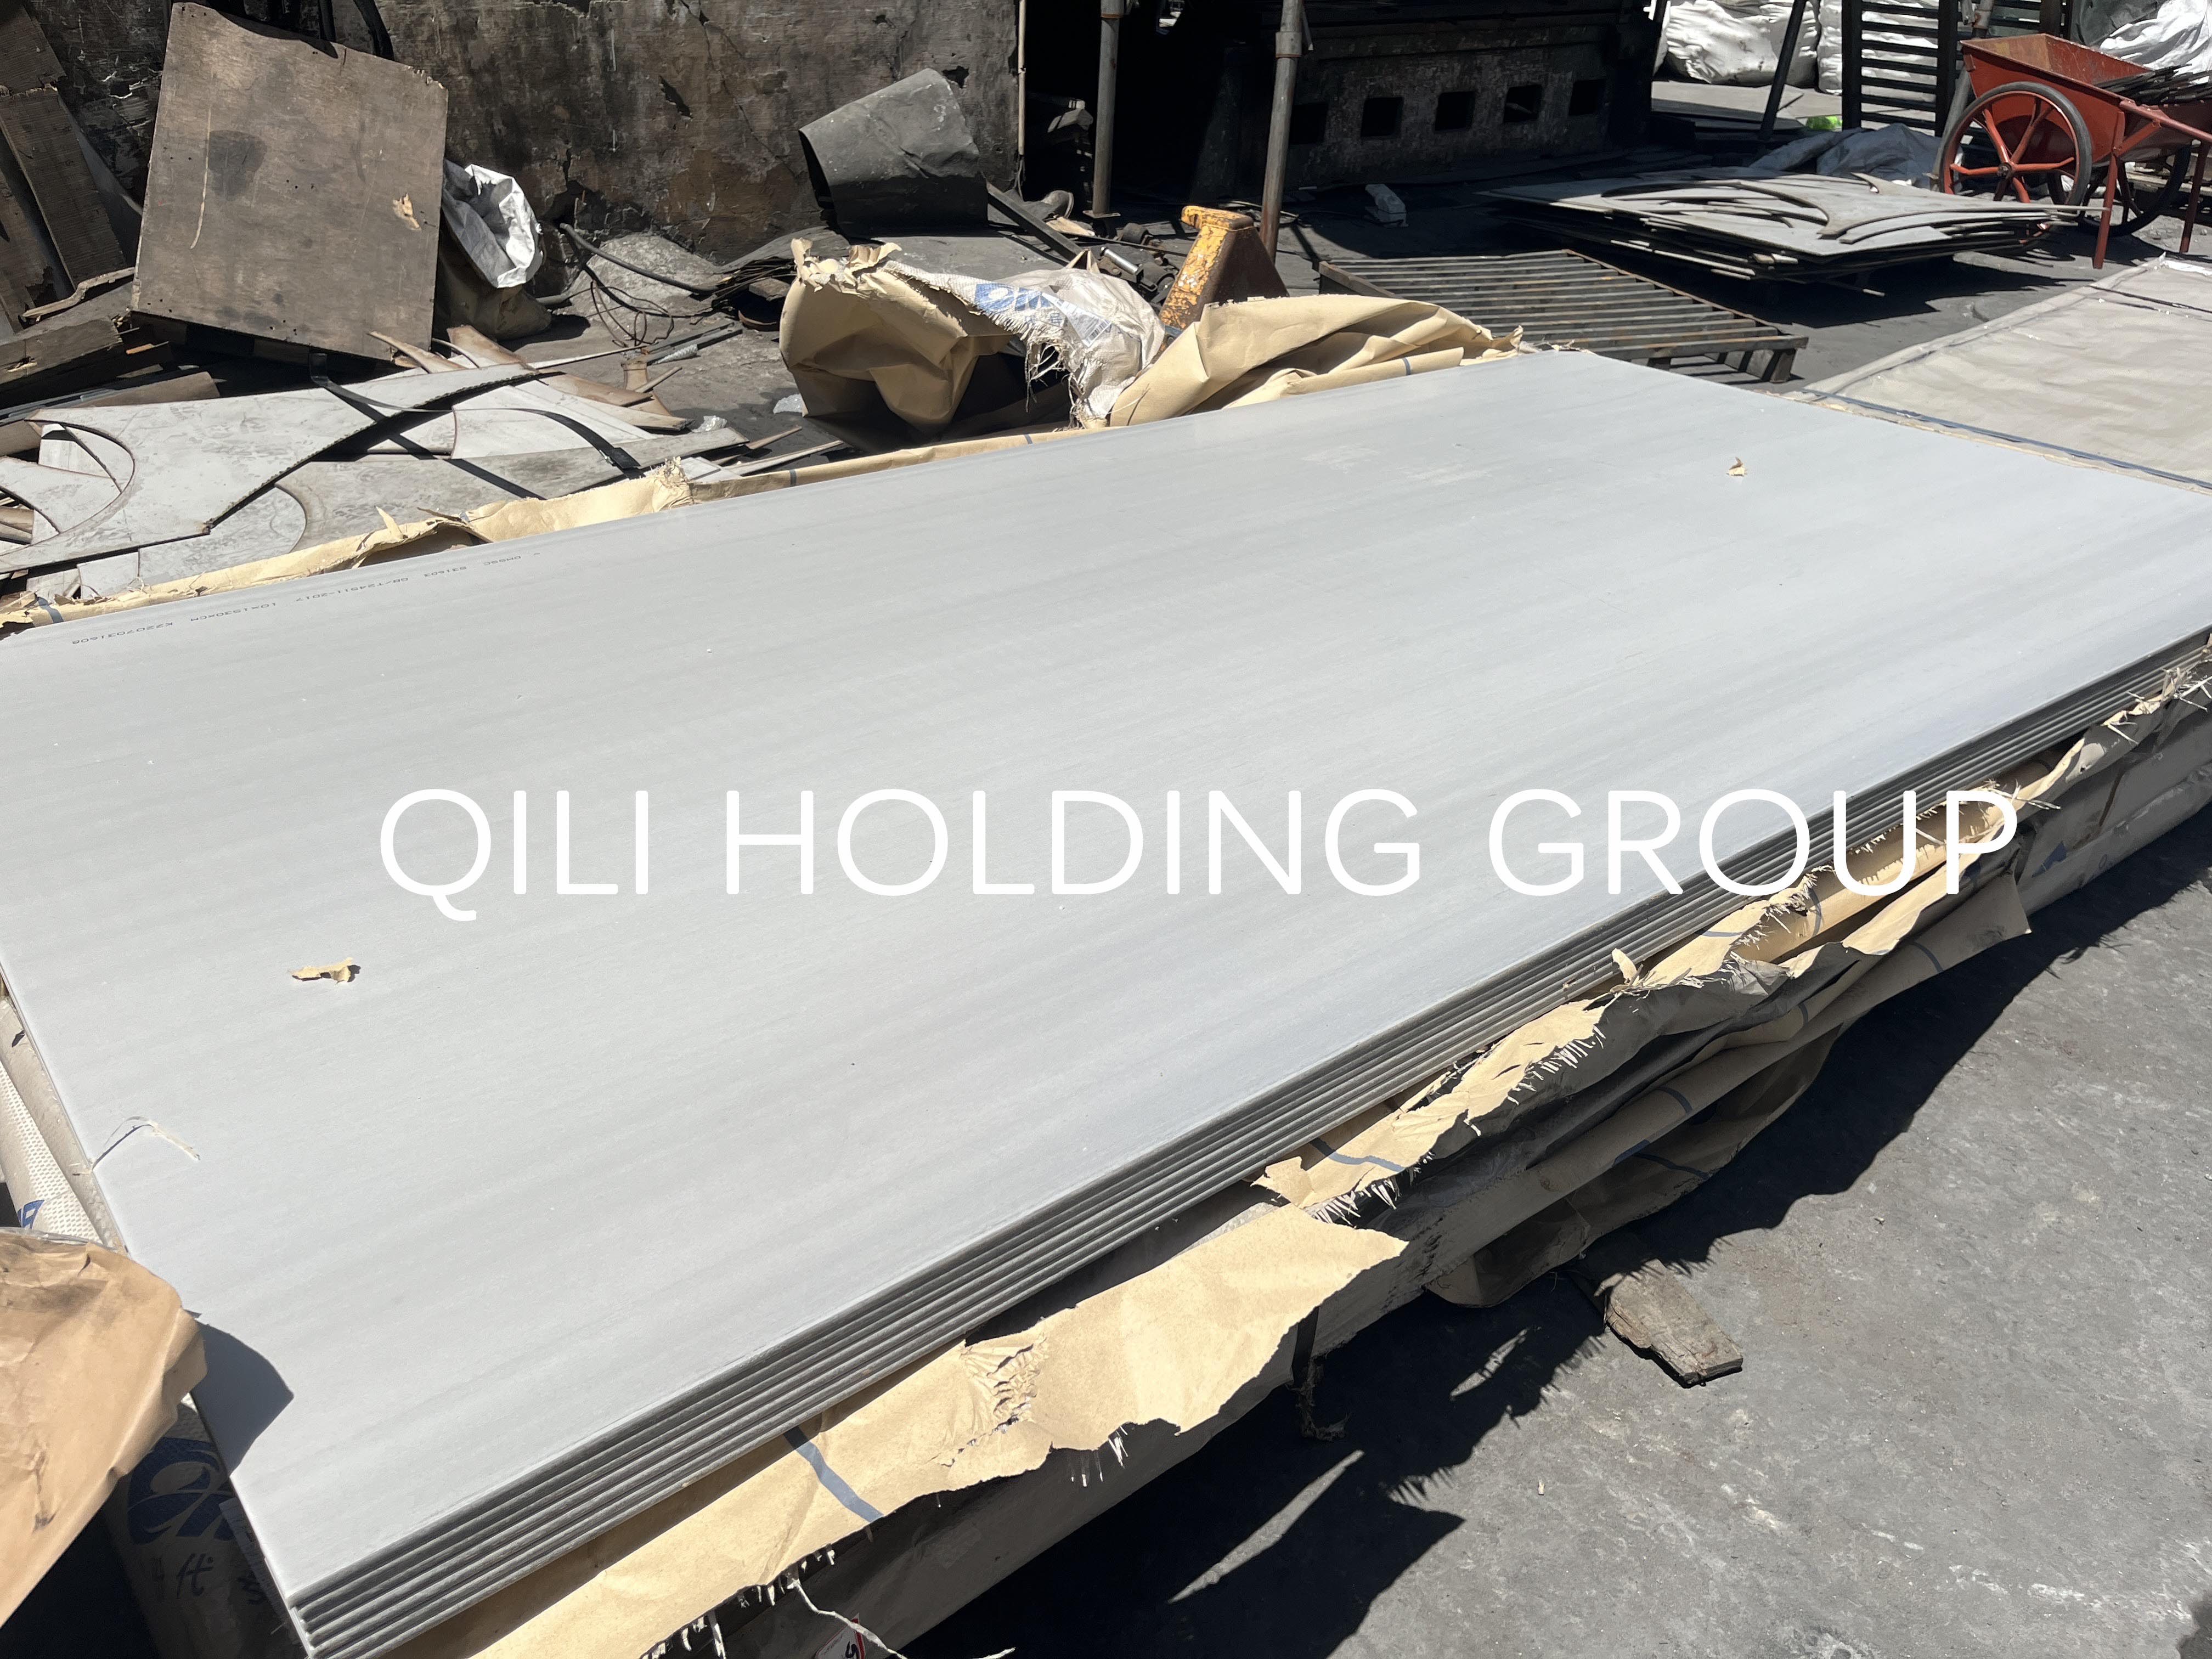 QILI holding group has just purchased 200 tons of steel plates from Tsingshan Holding Group